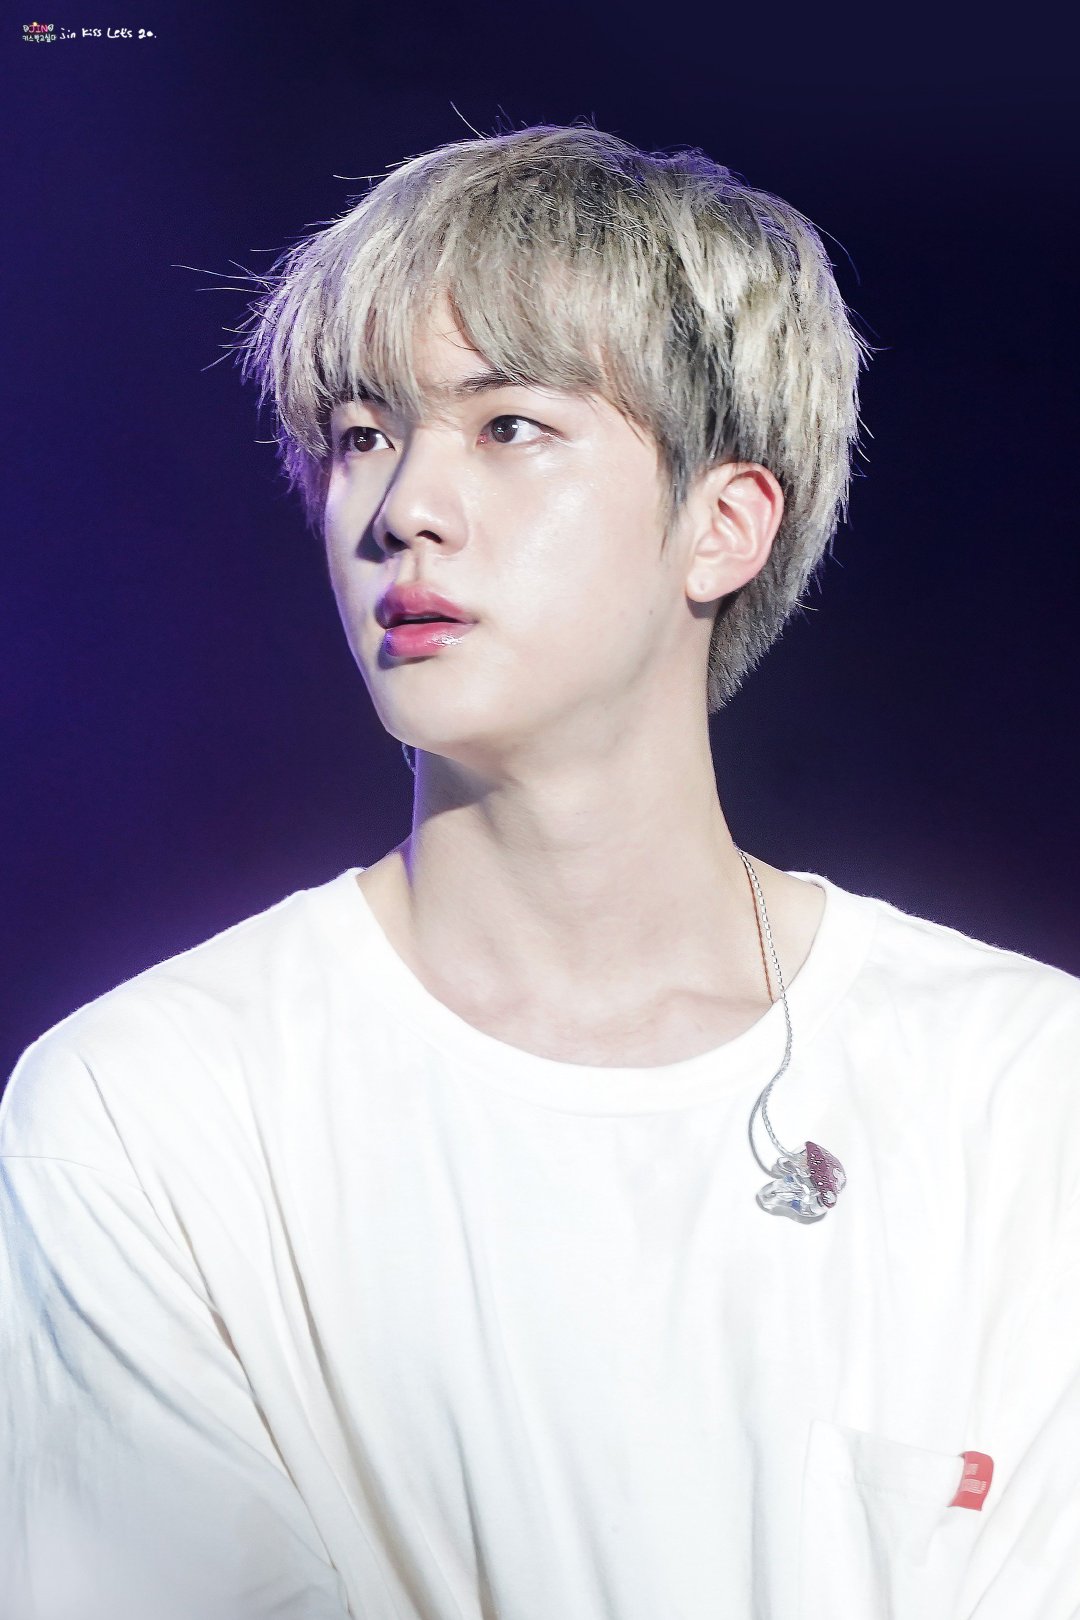 bts world tour "love yourself" in singapore jin